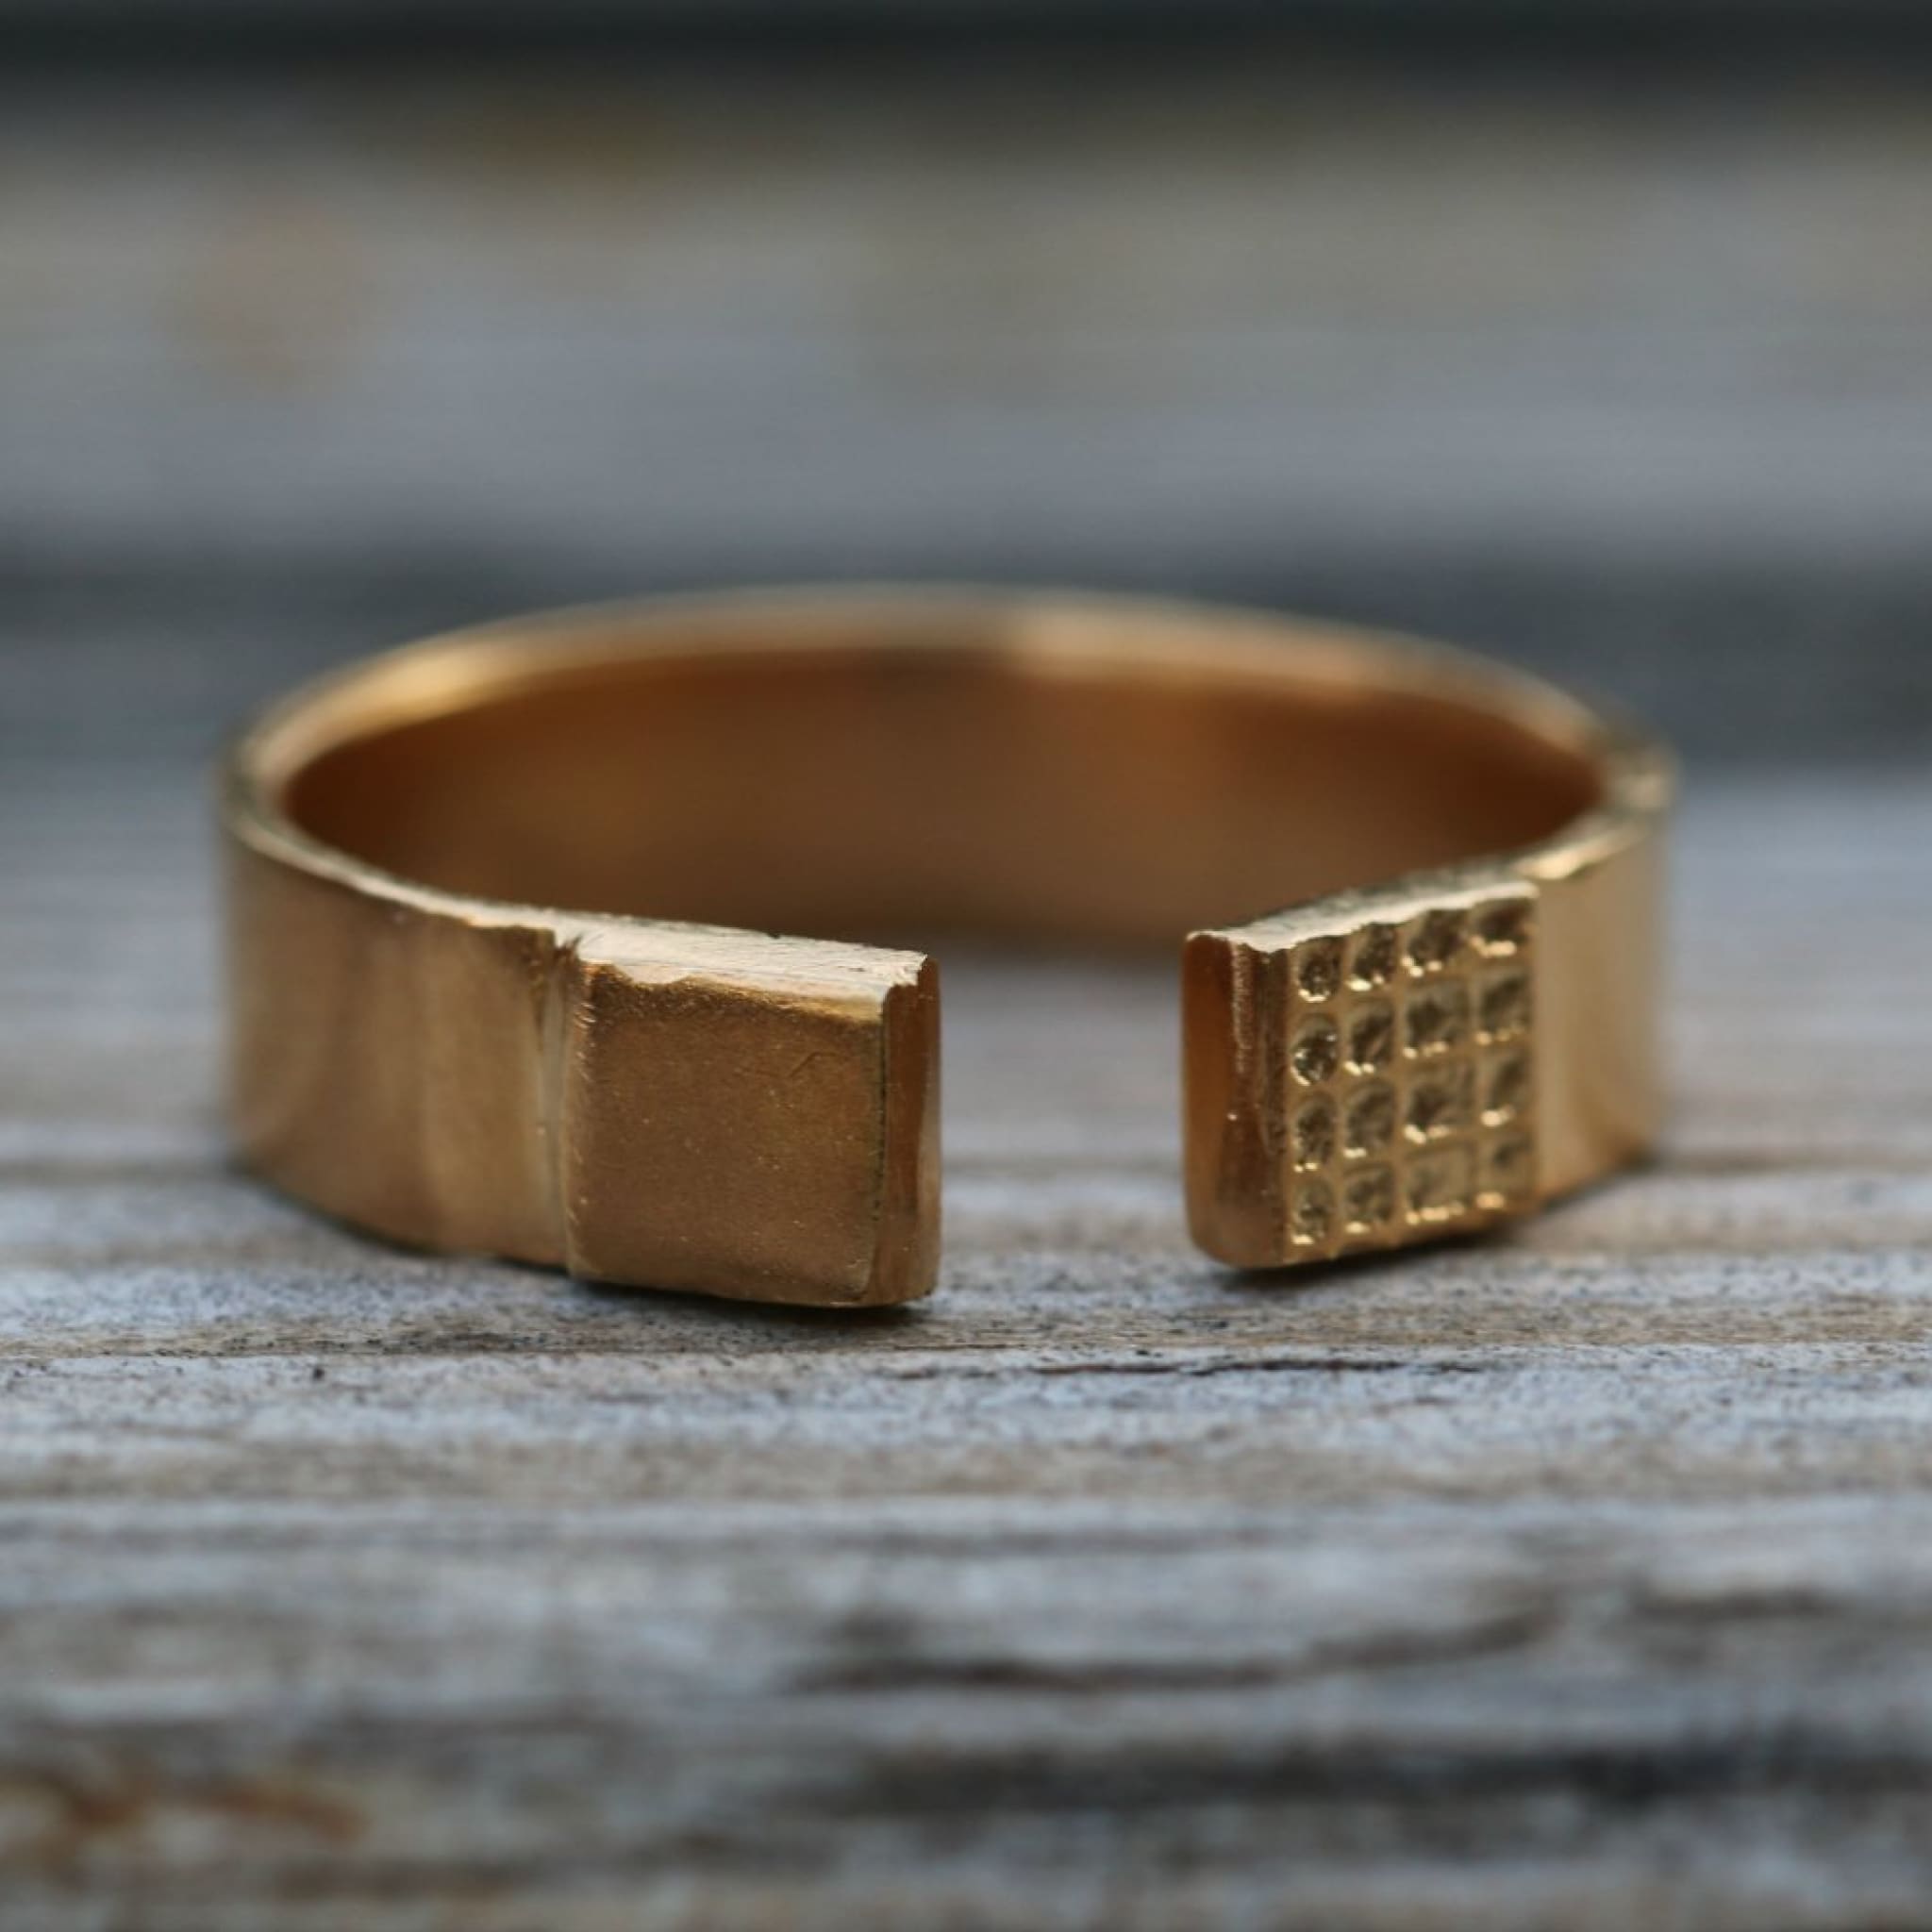 14K Gold Plated Minimalist Open Ring Jewelry Rings